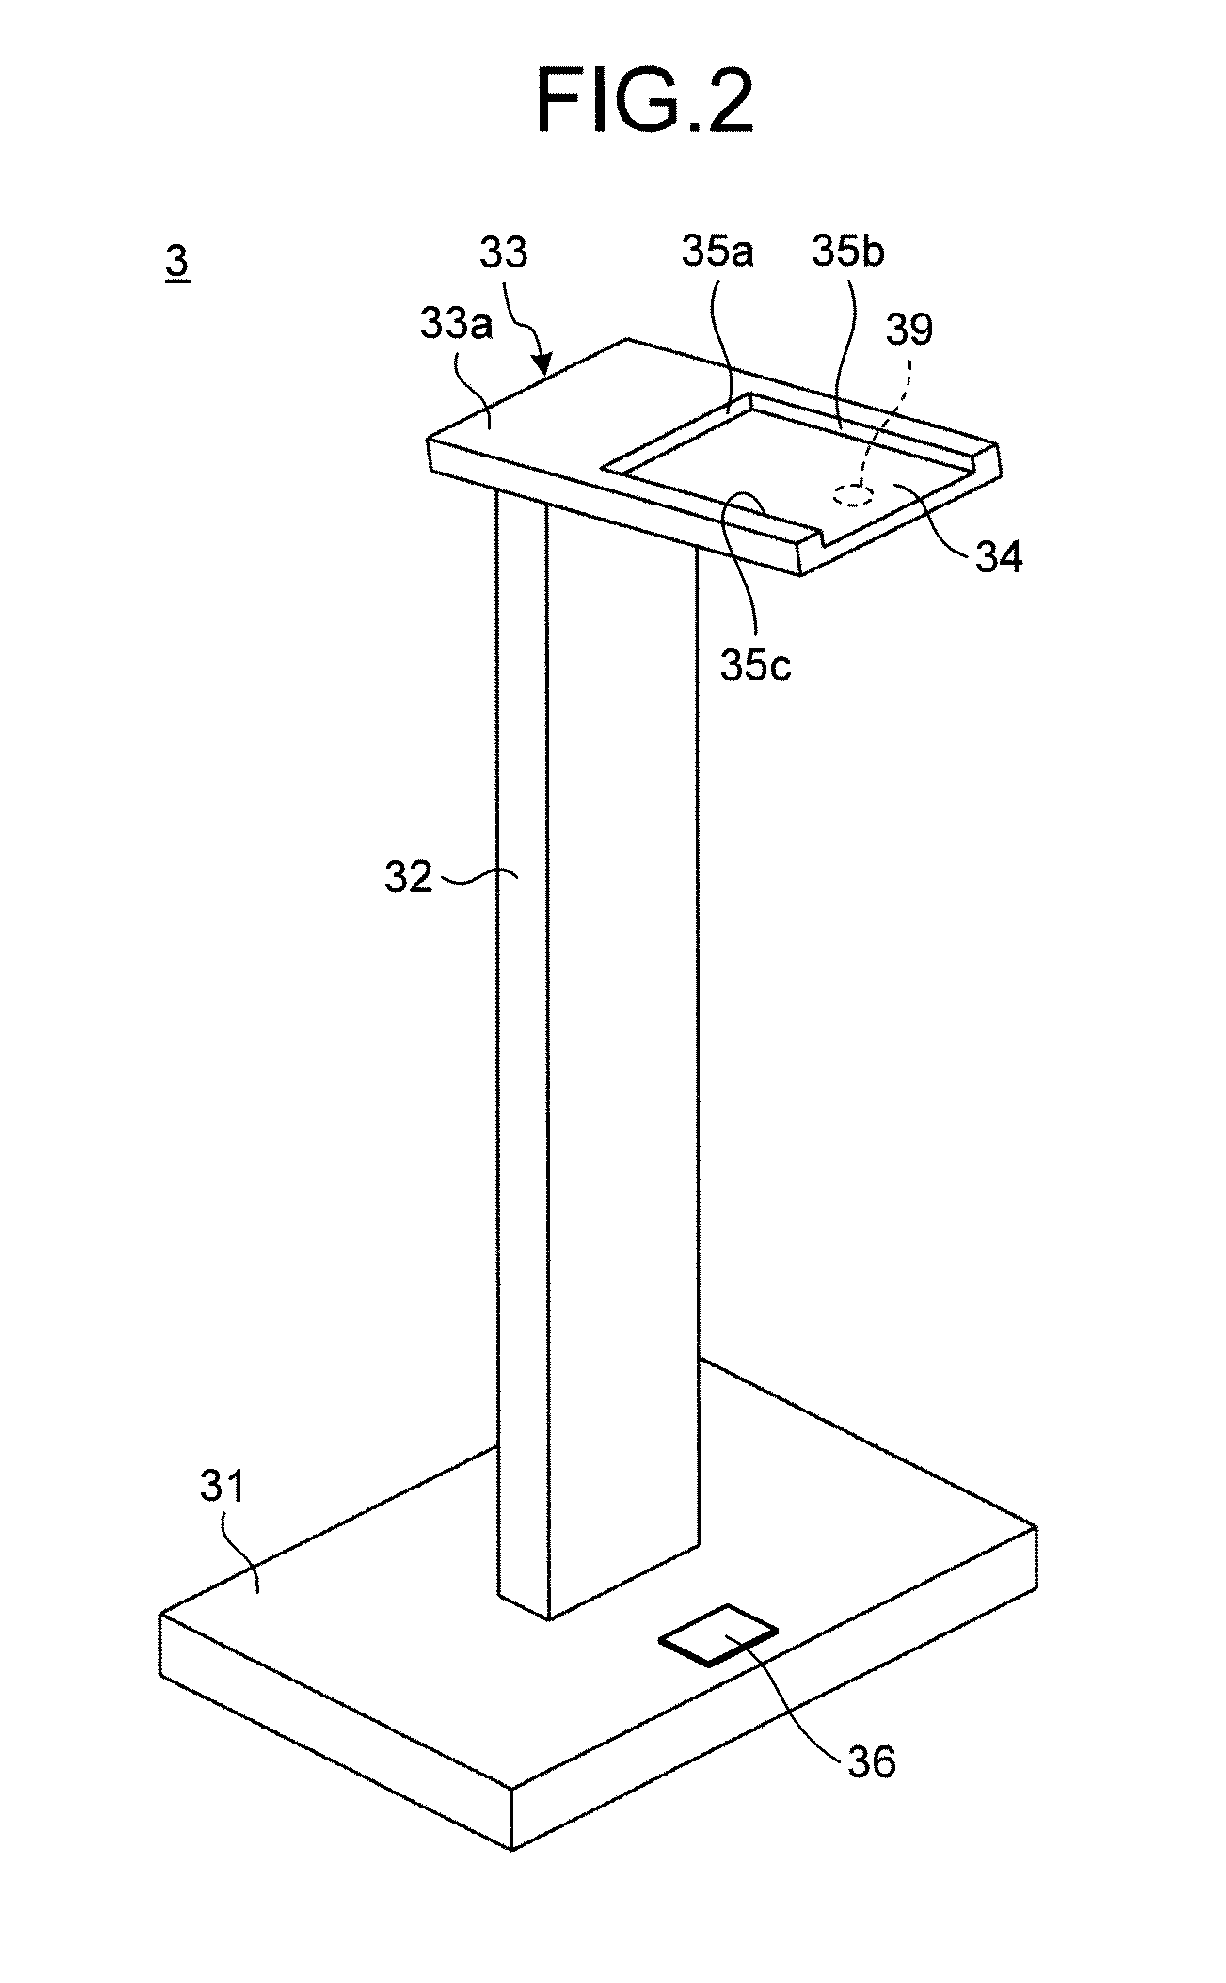 Image capturing system having a virtual switch on a surface of a base of a mounting stand